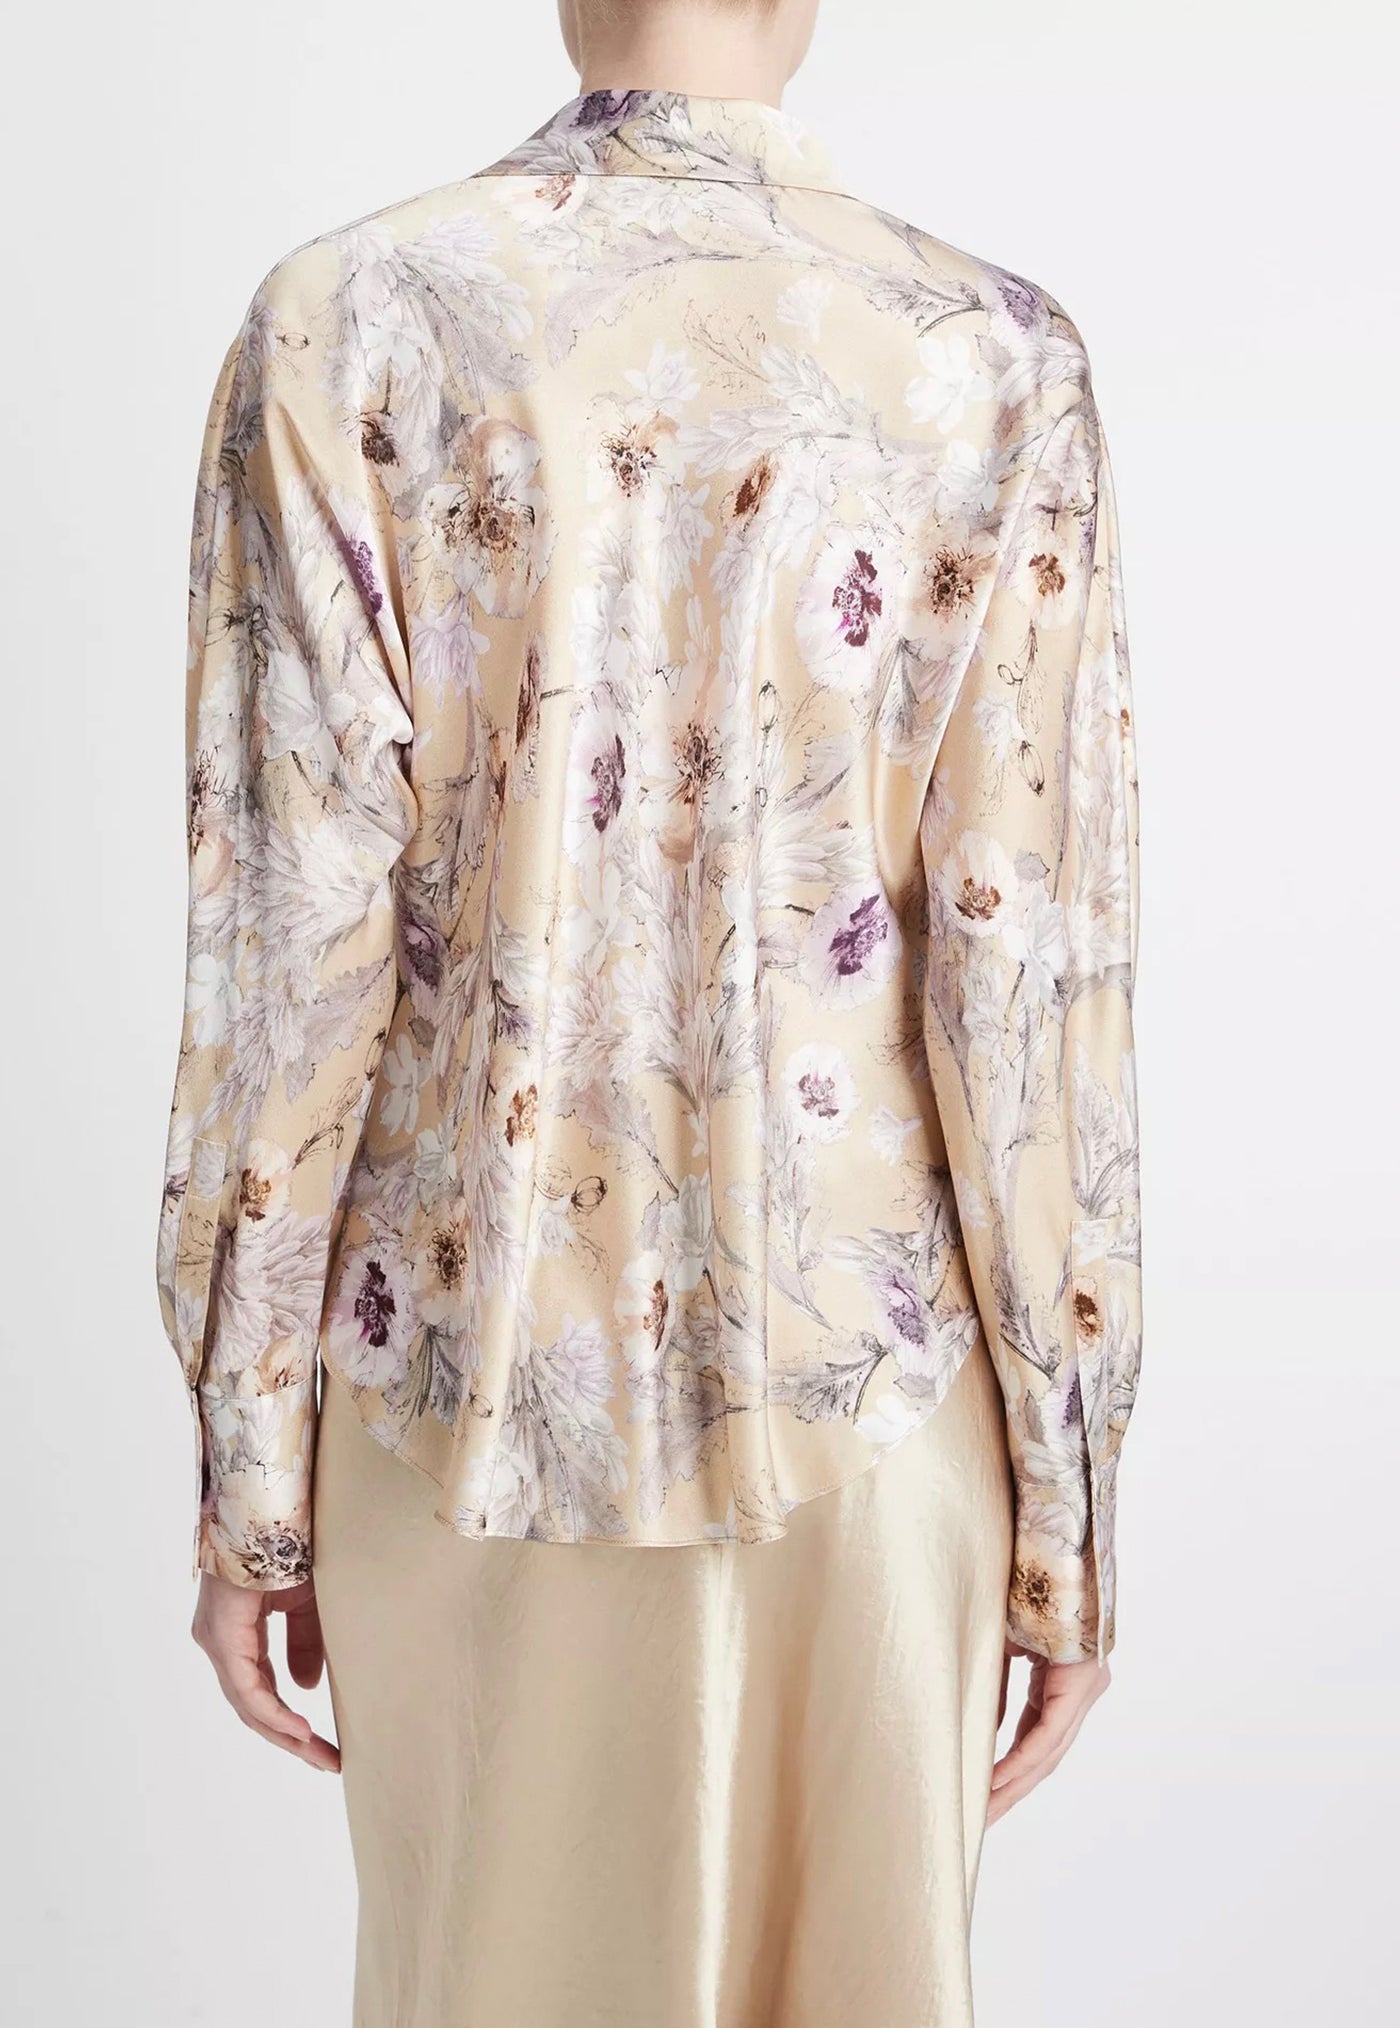 Wildflower Bias Blouse - Sand sold by Angel Divine